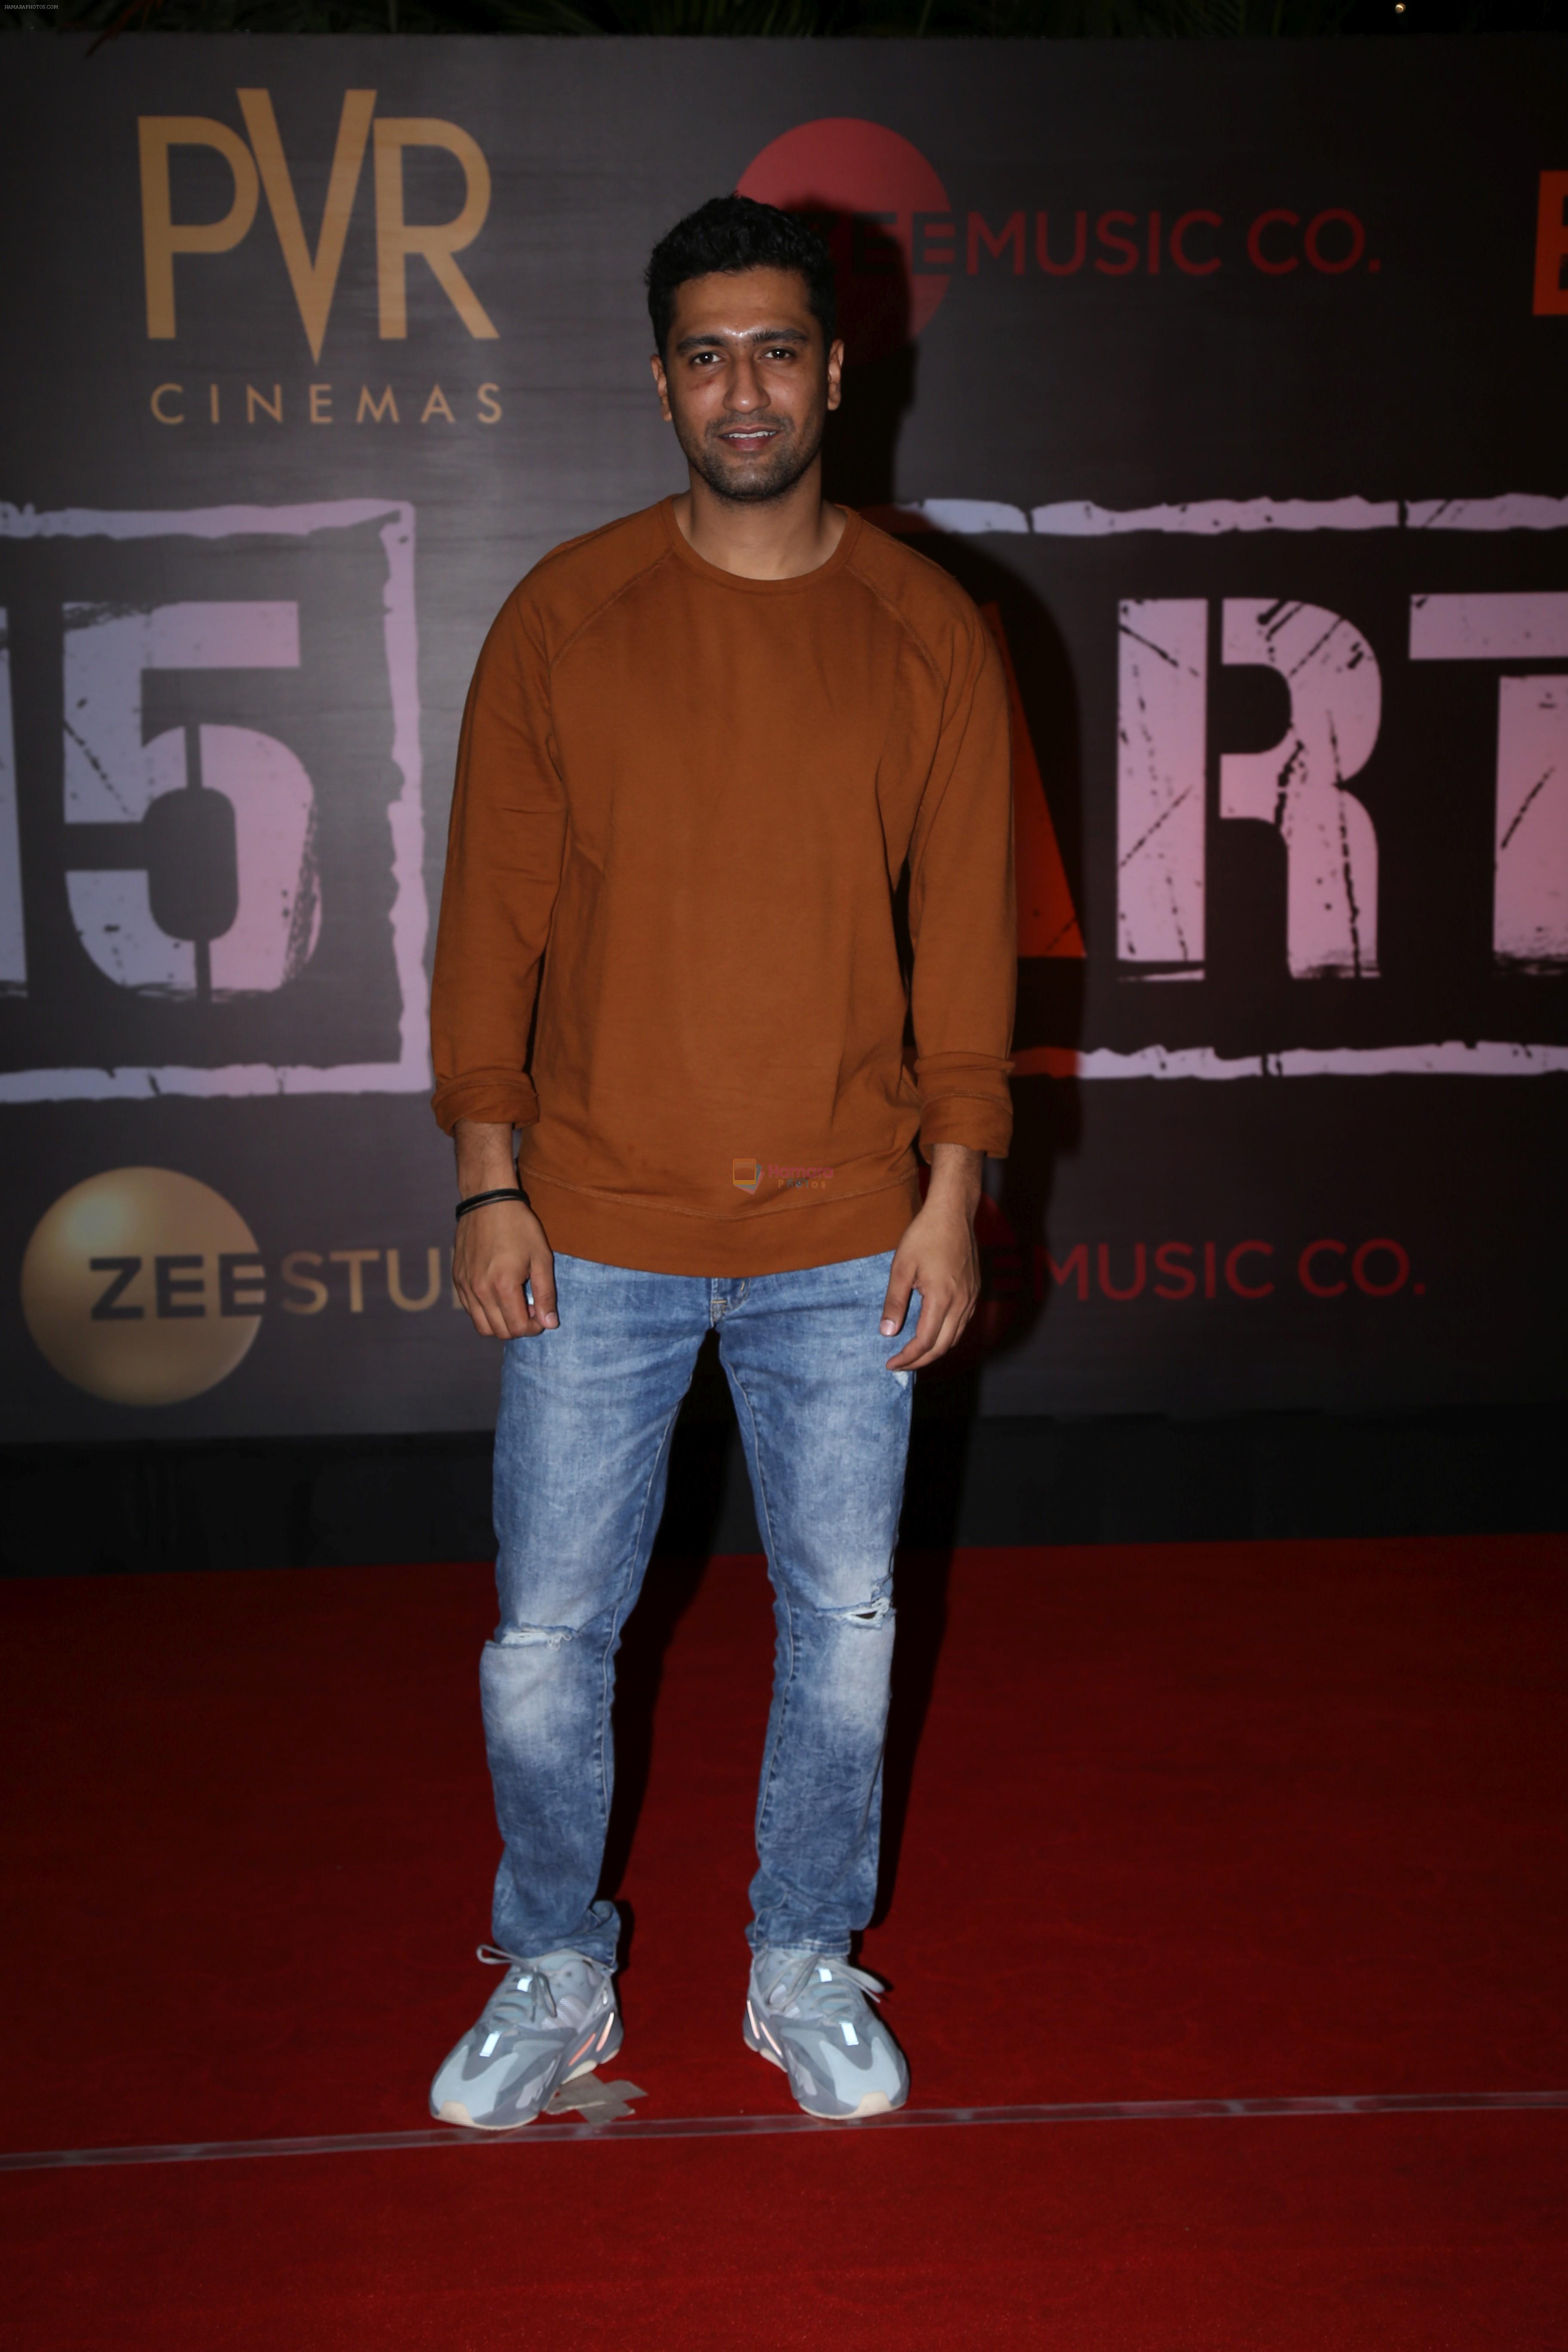 Vicky Kaushal at the Screening of film Article 15 in pvr icon, andheri on 26th June 2019